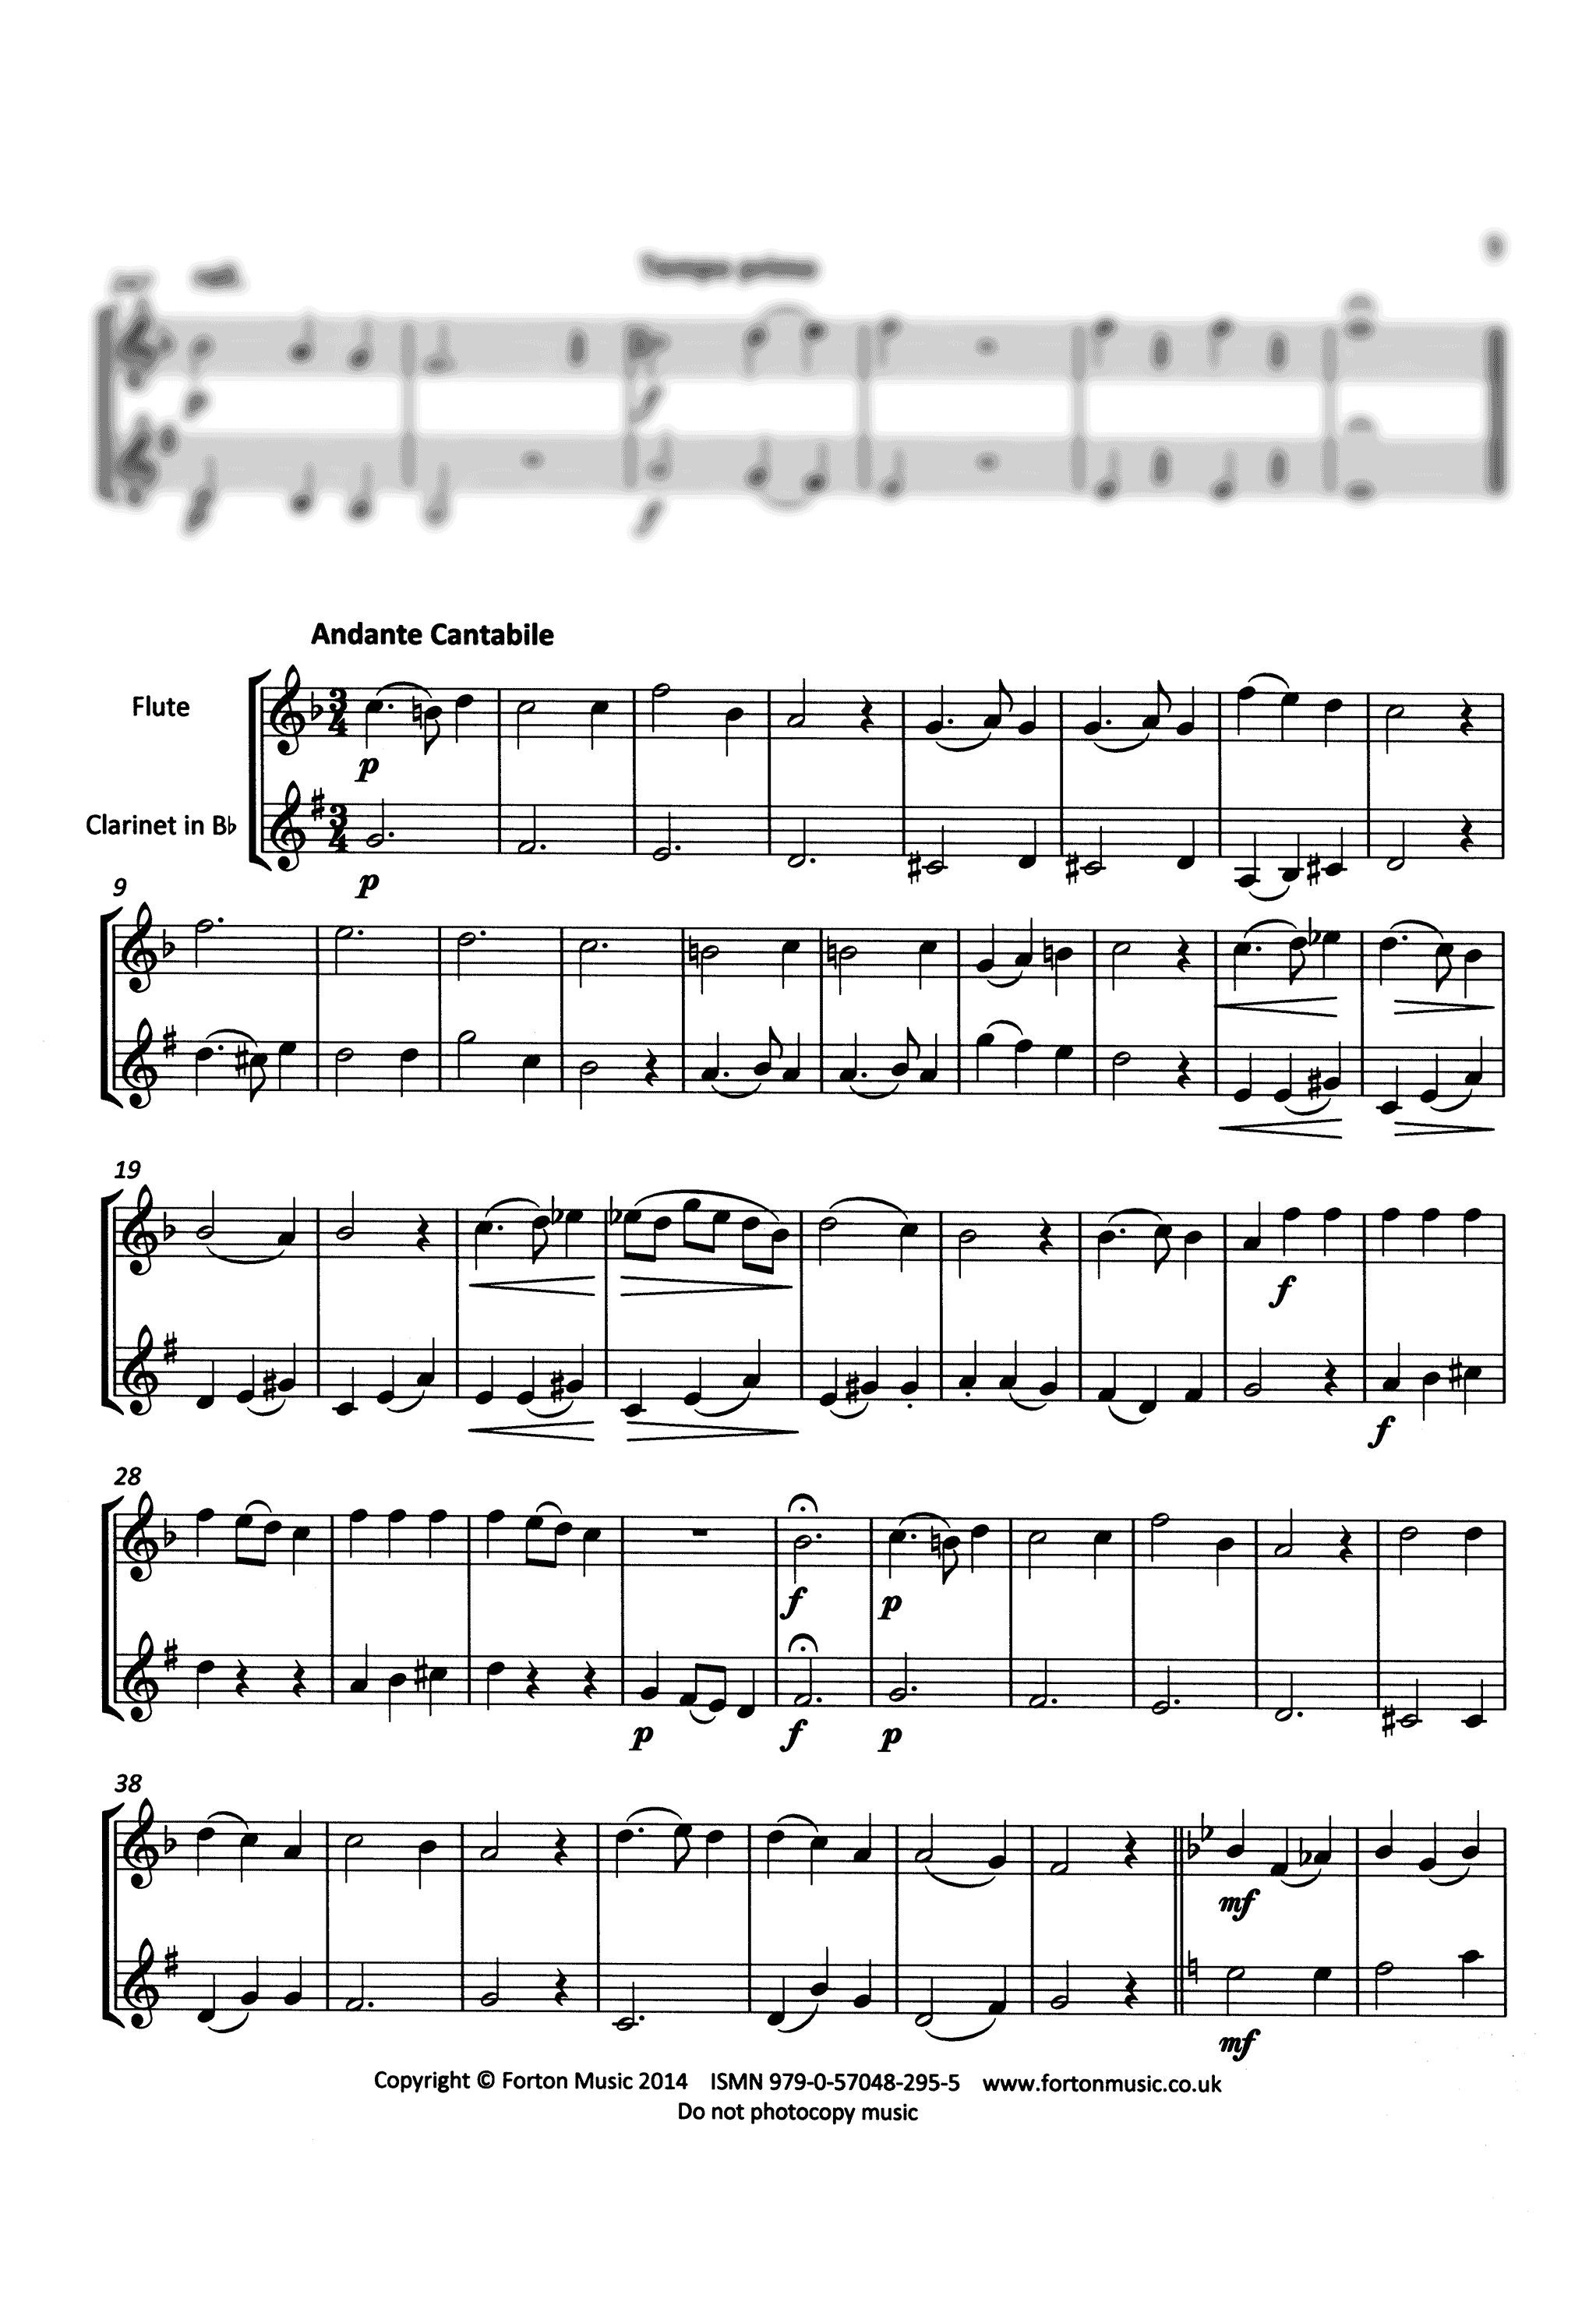 Offenbach Duo, Op. 51 No. 2 flute and clarinet arrangement - Movement 2